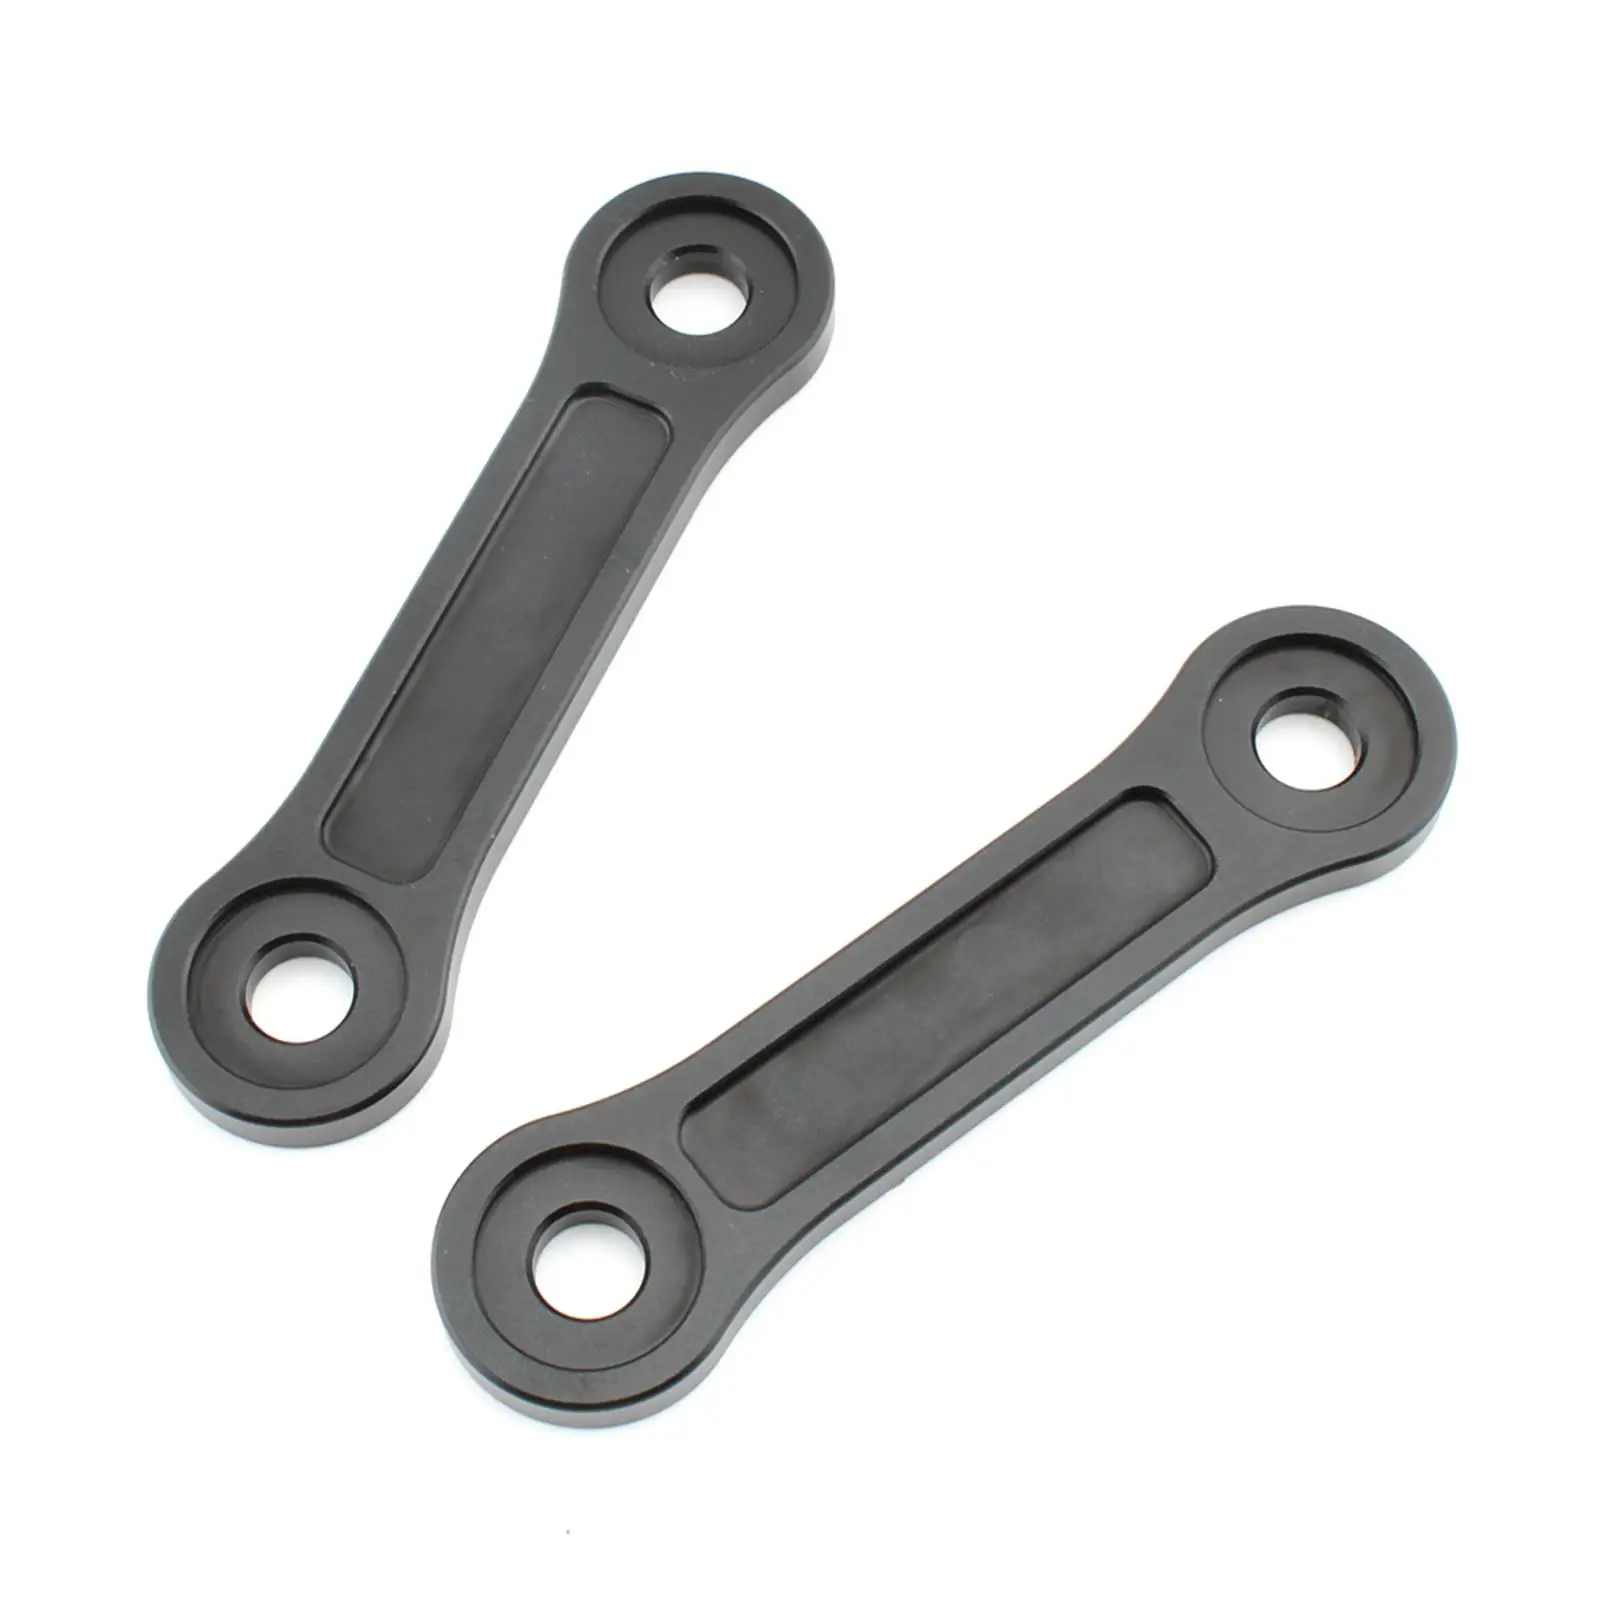 2x Motorcycle Rear Suspension Lowering Links Kit Replacement Rustproof Assembly Durable Dog Bones Linkages for Tiger1200